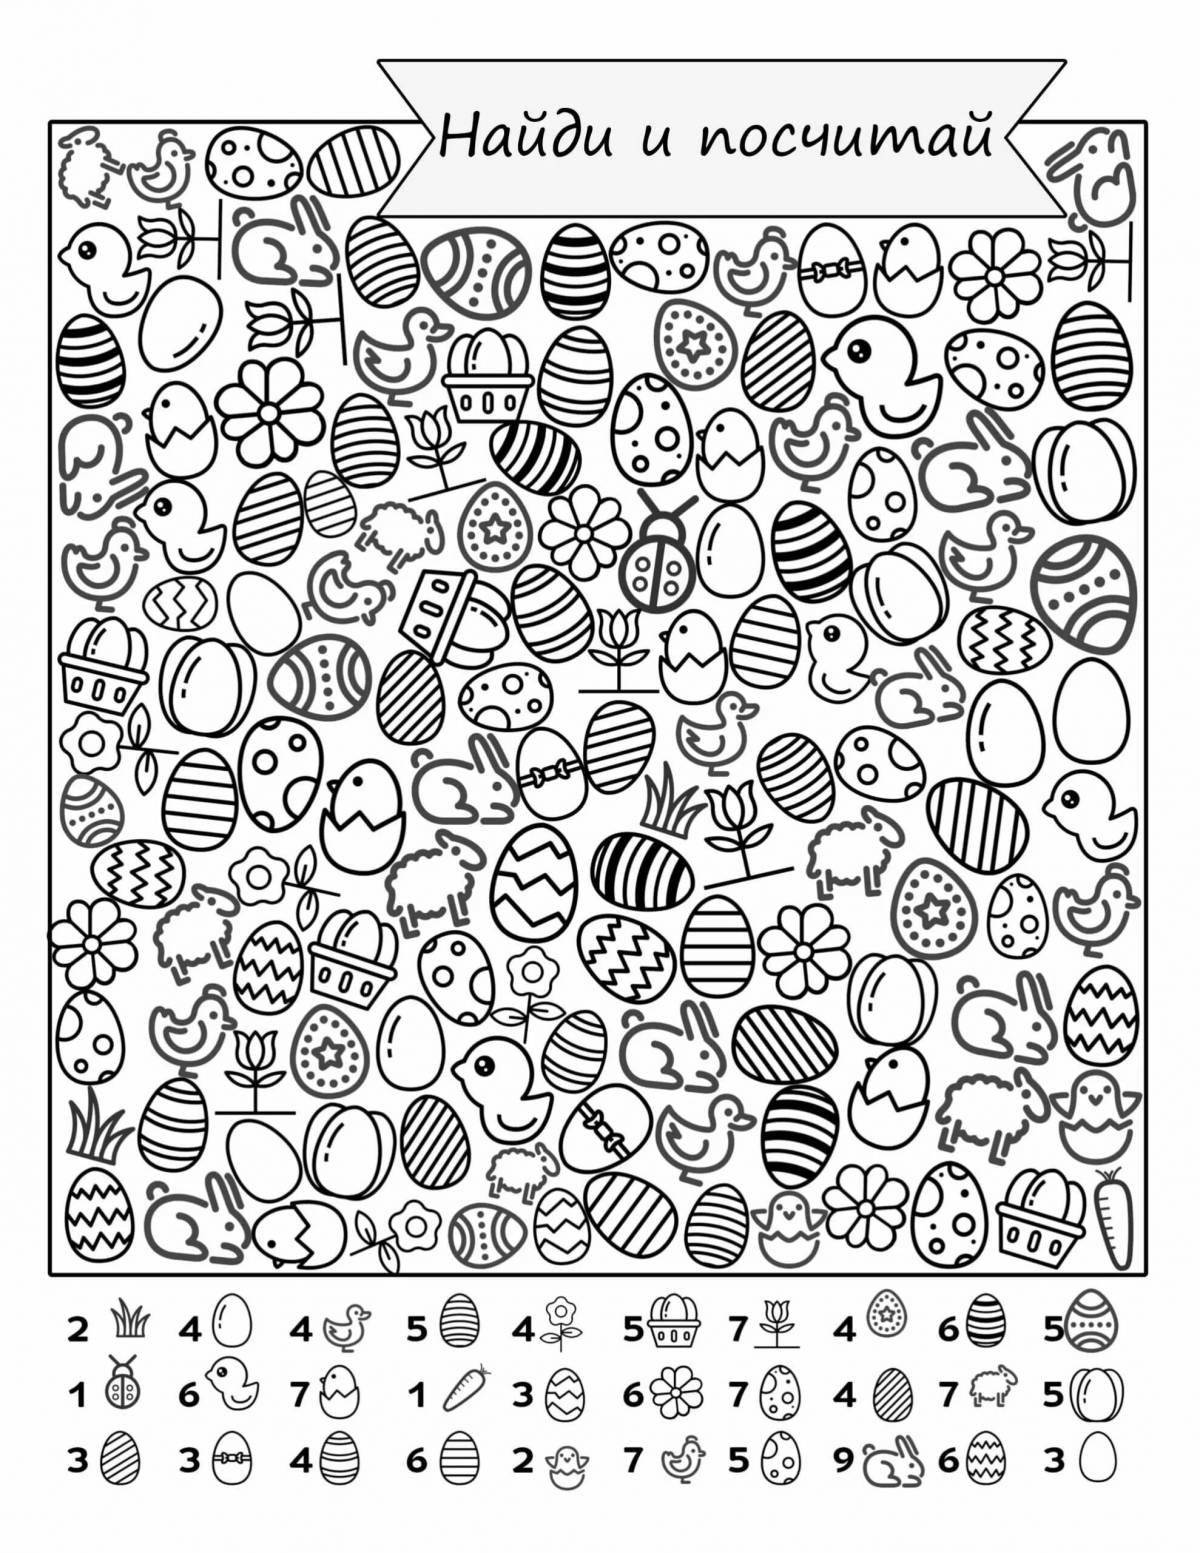 Soothing coloring pages to practice mindfulness